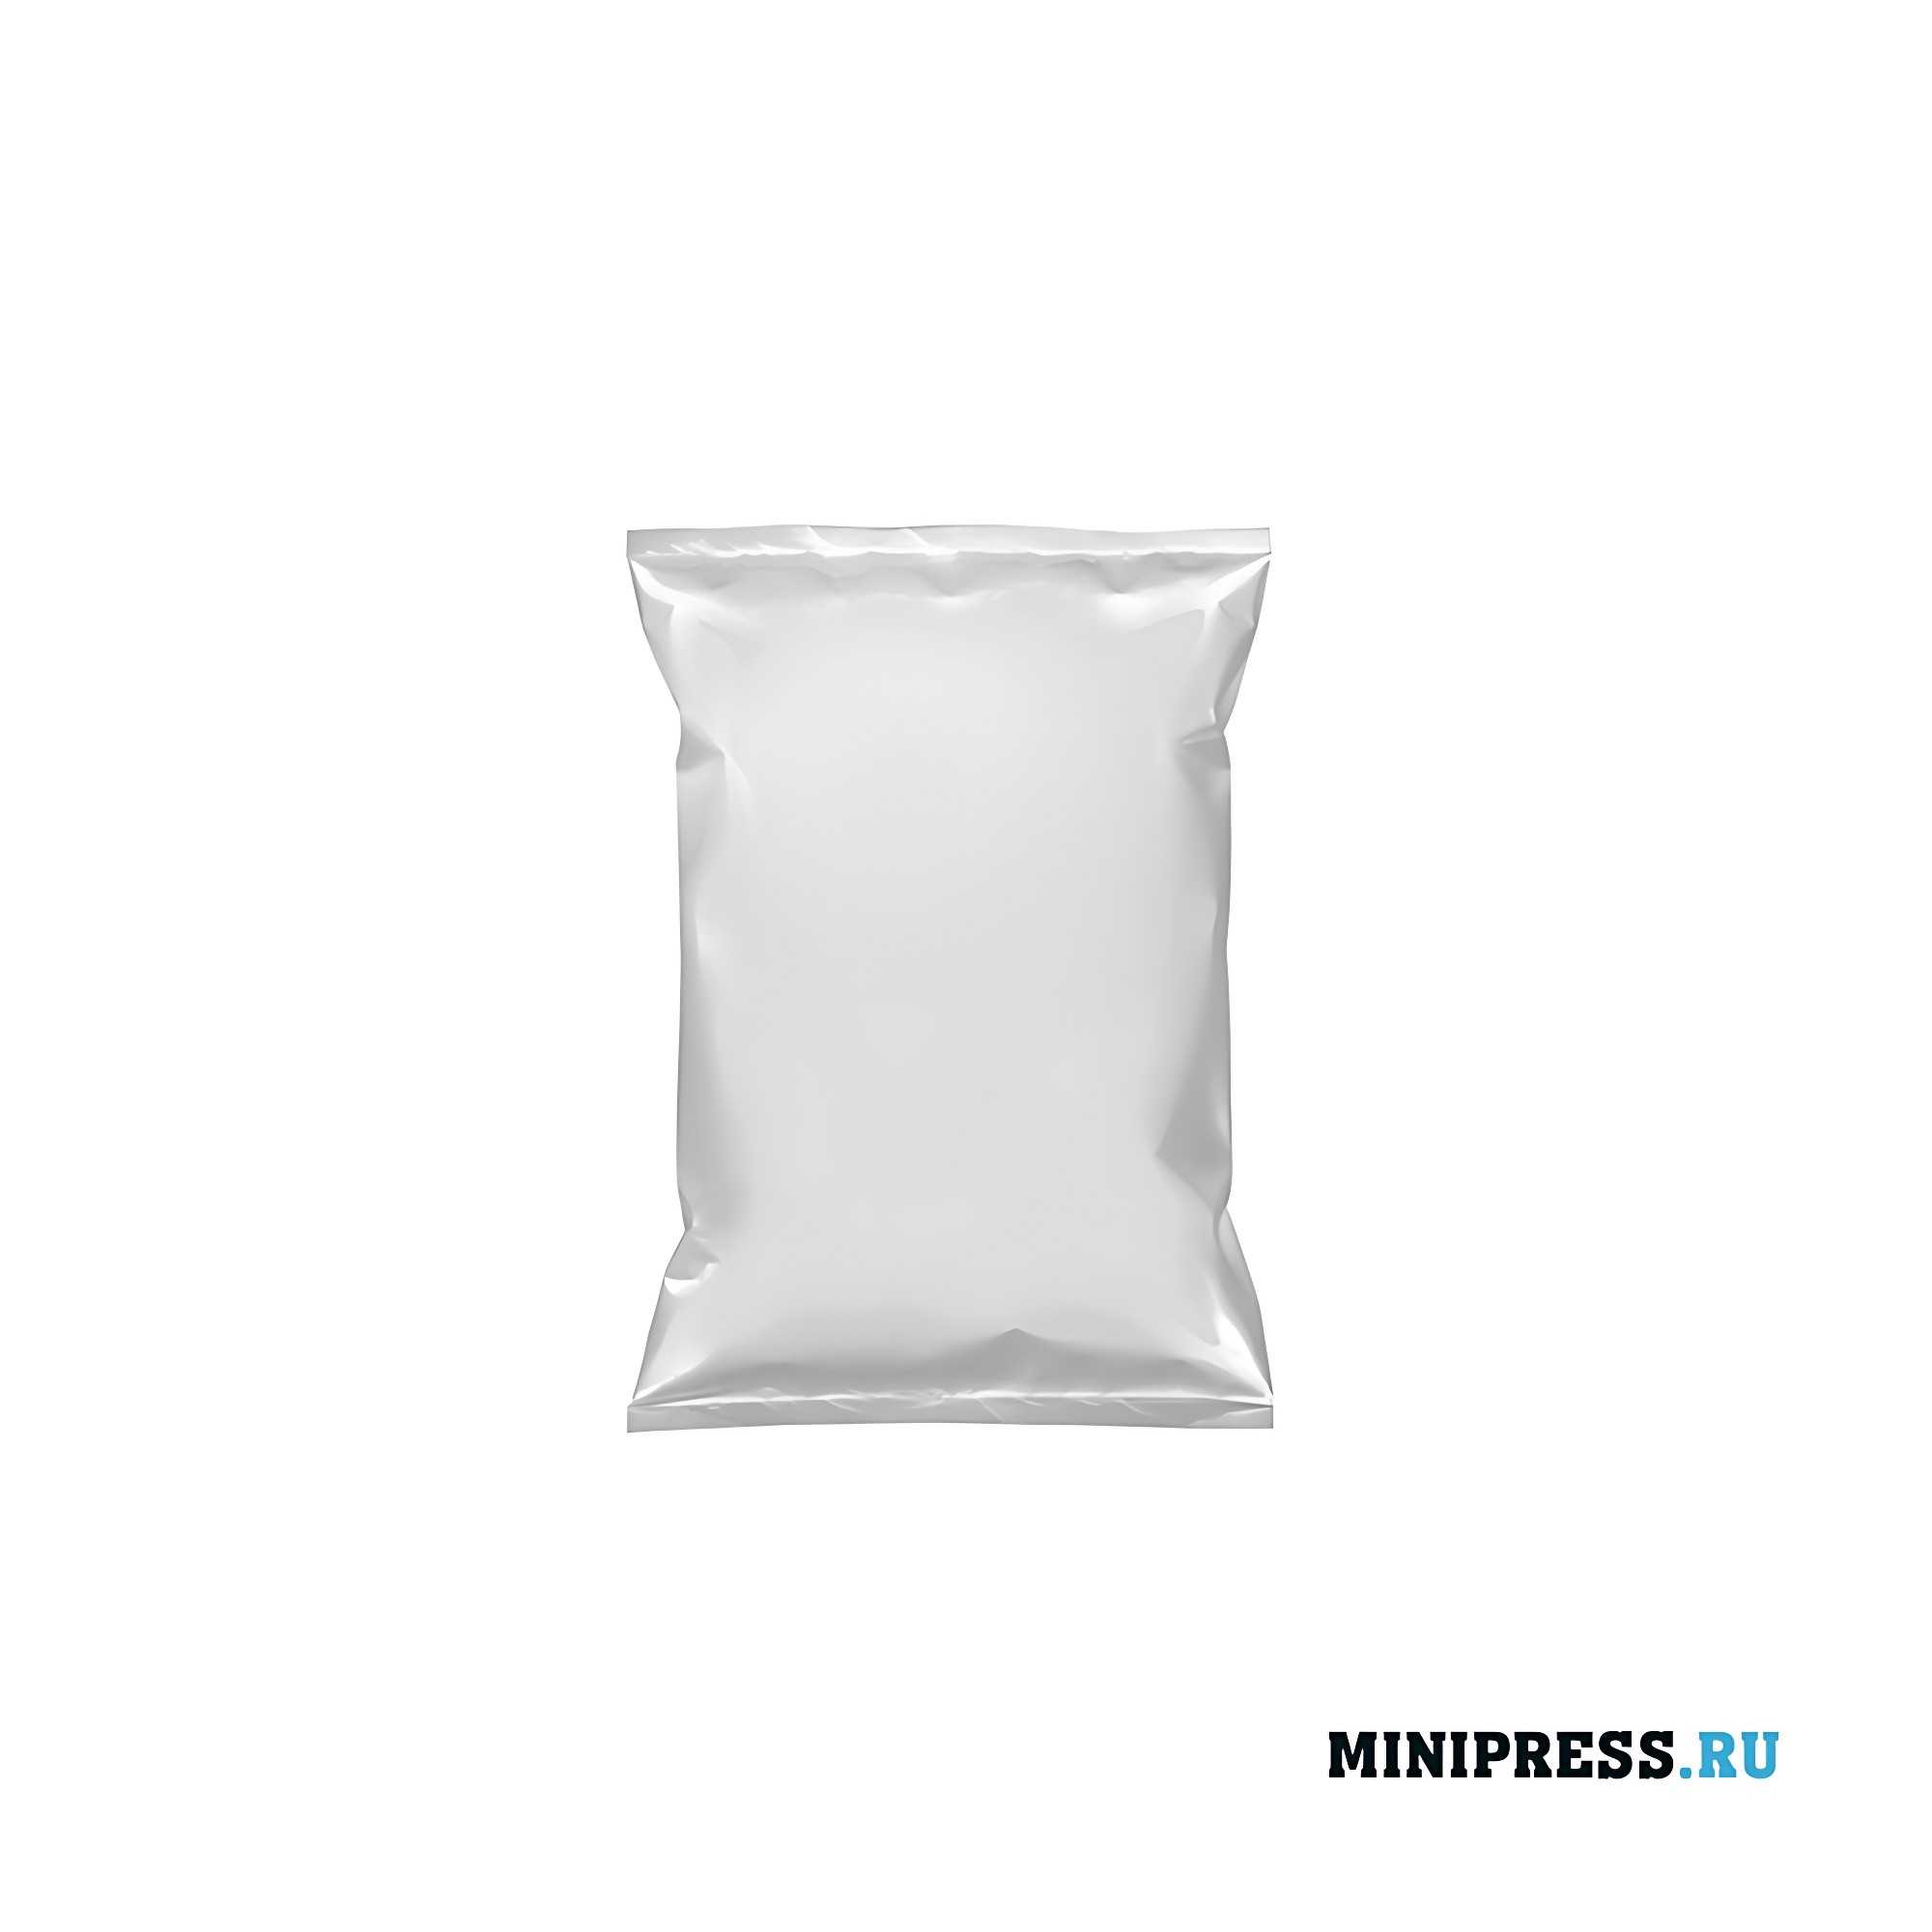 Equipment for packing powder into a bag of type 